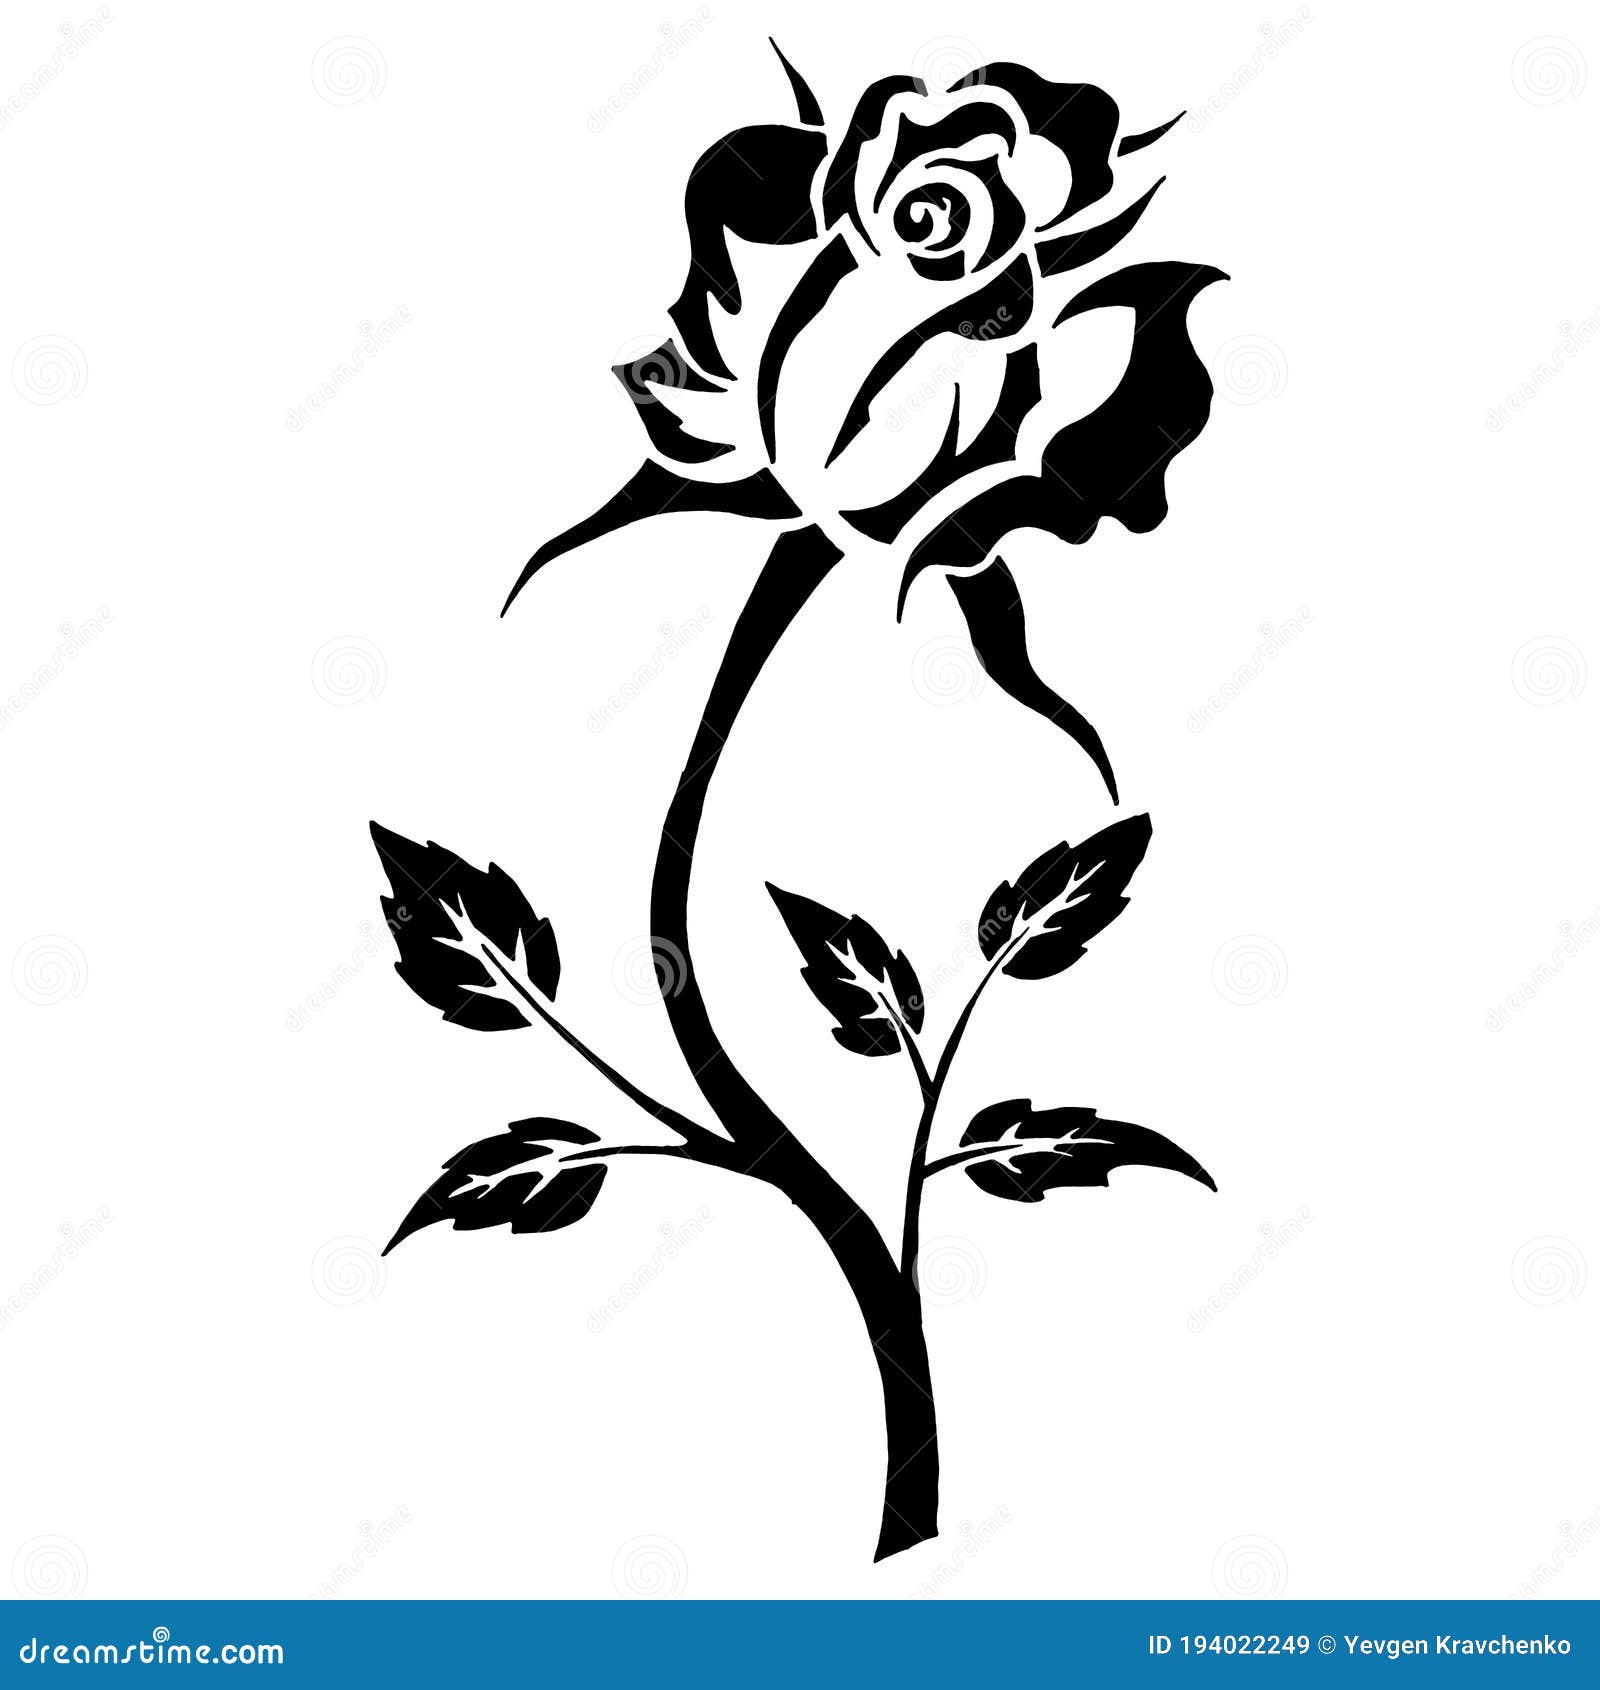 Rose Blooming Icon. Vector Illustration of a Rose Bud with Leaves. Hand ...